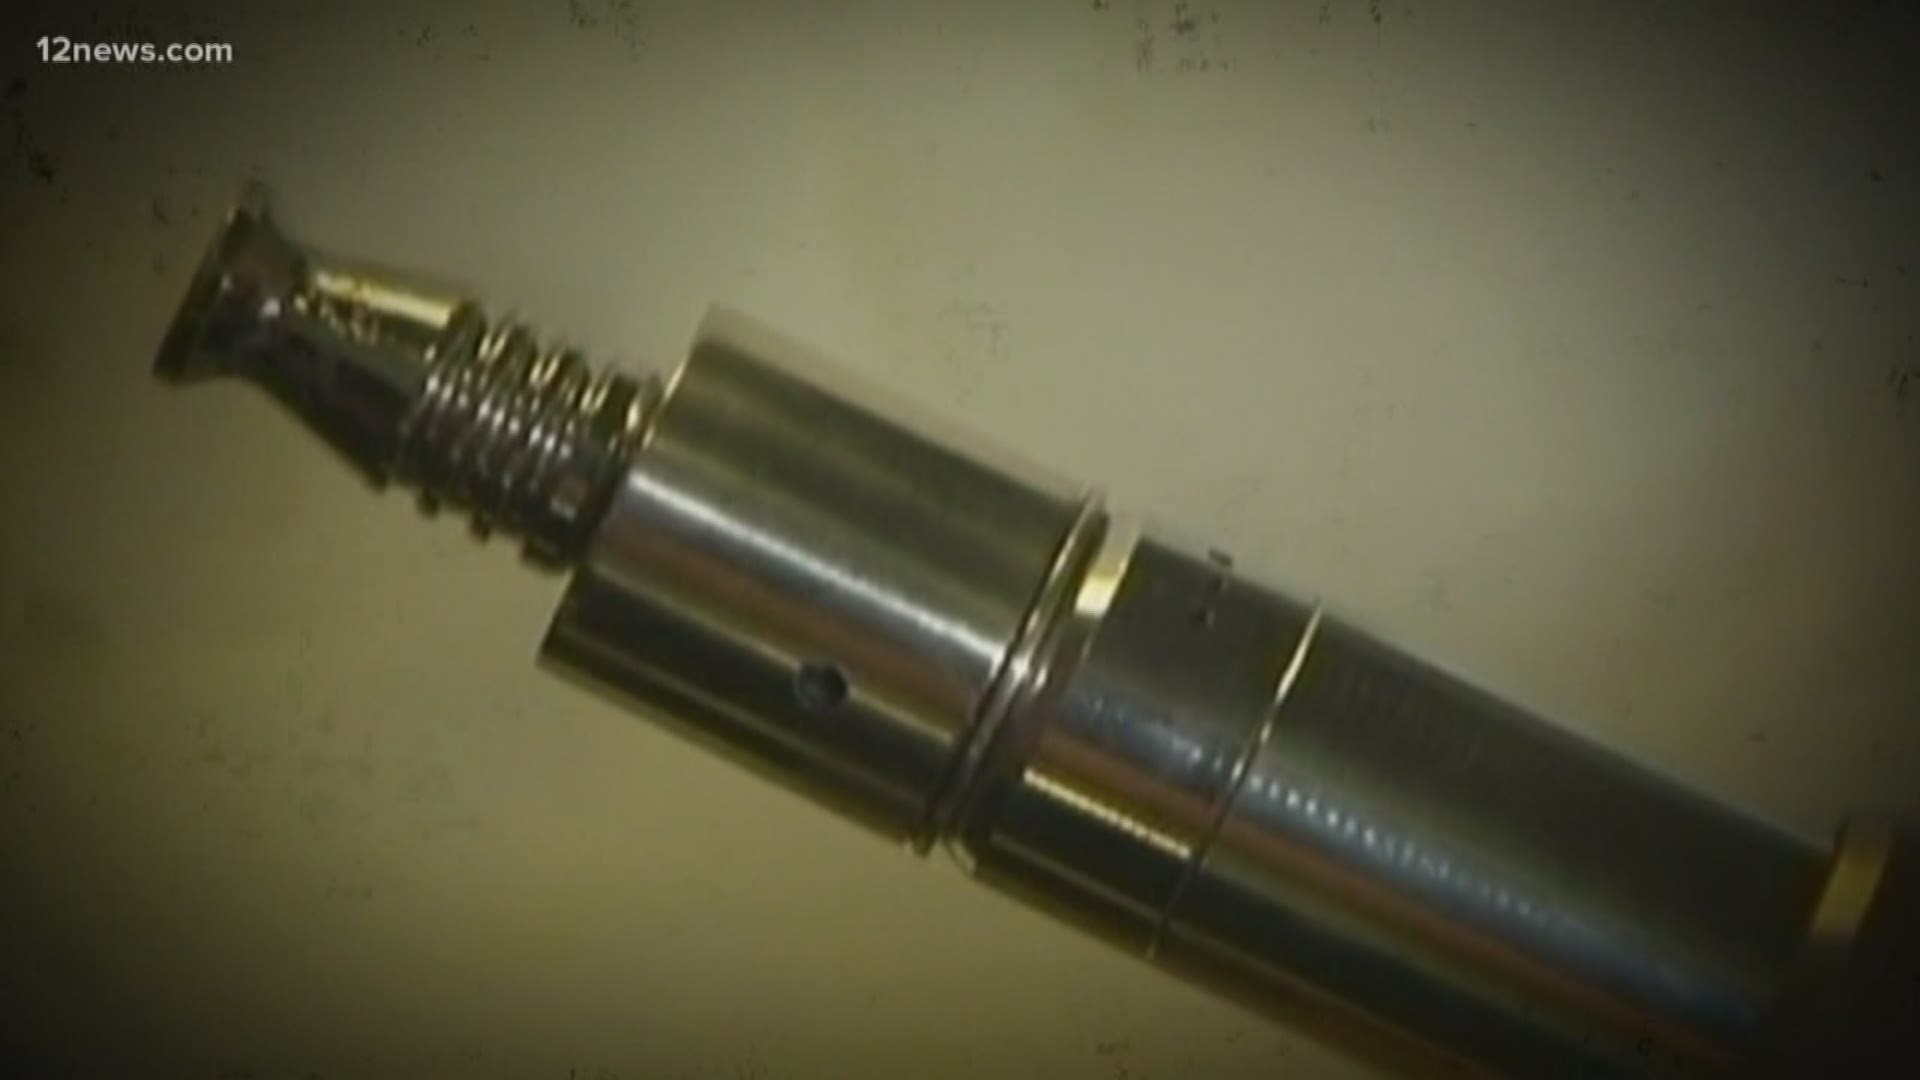 A tough bill cracking down on vaping products won the unanimous support of the state Senate and now heads to the House. The bill would regulate e-cigarettes in the same way tobacco is regulated in Arizona.